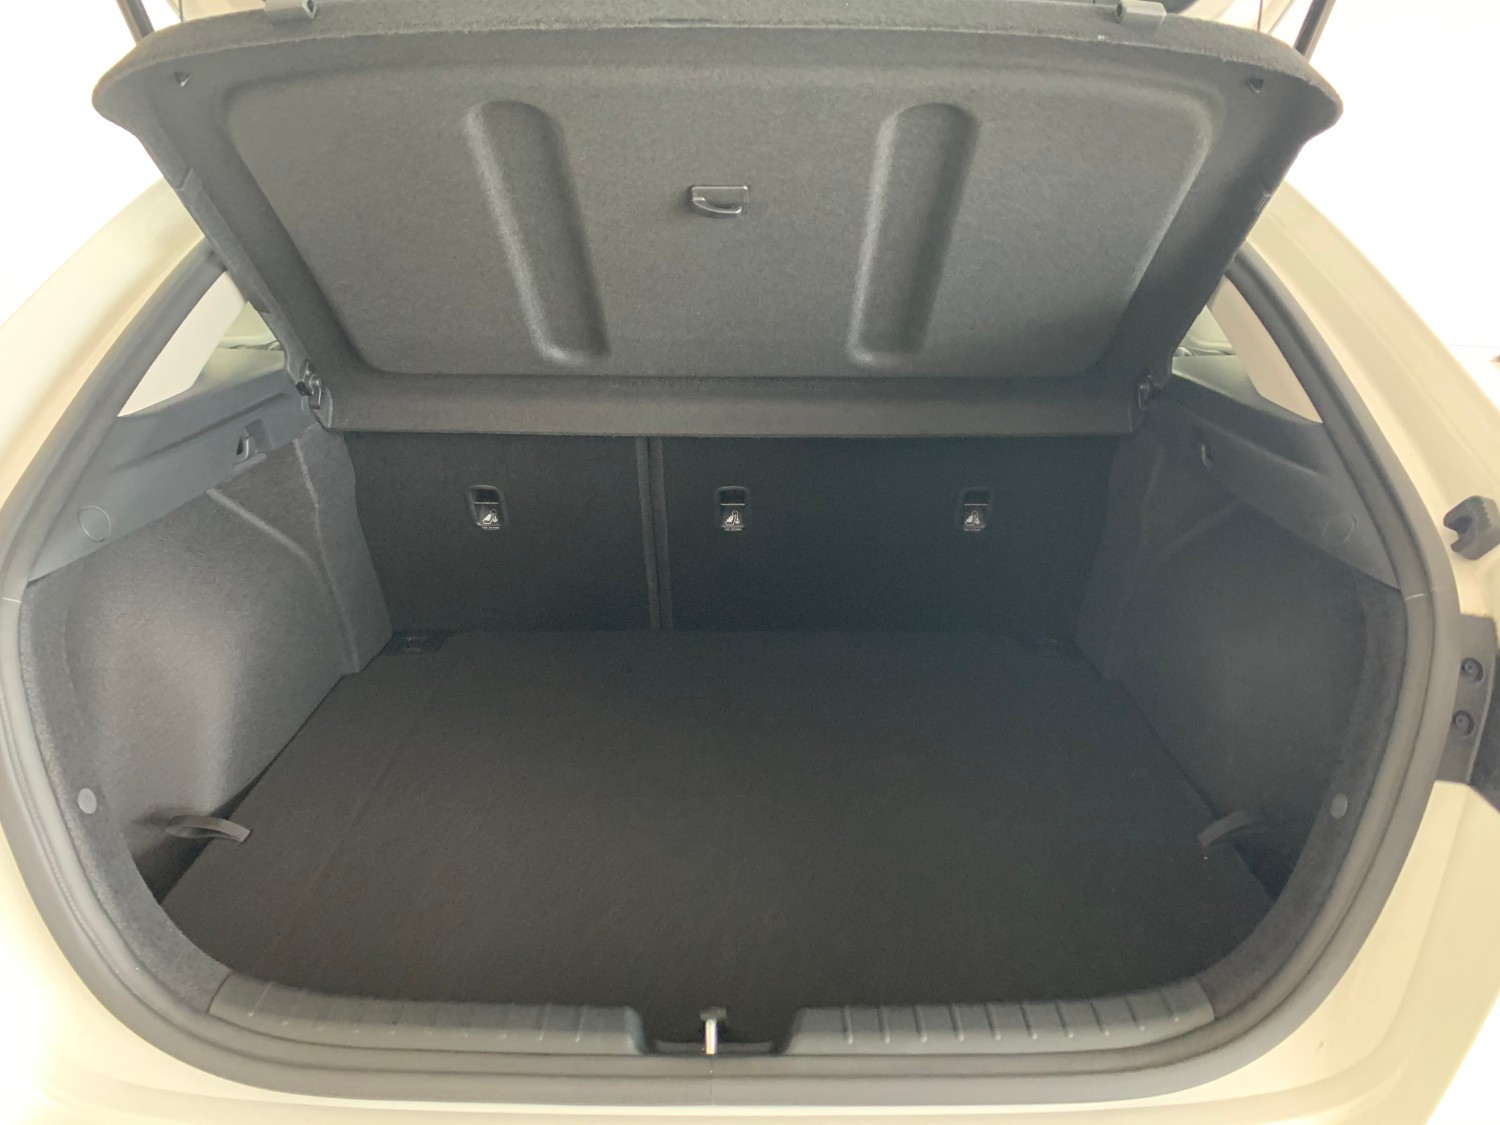 2019 MY20 Kia Cerato Hatch BD S with Safety Pack Hatch Image 11